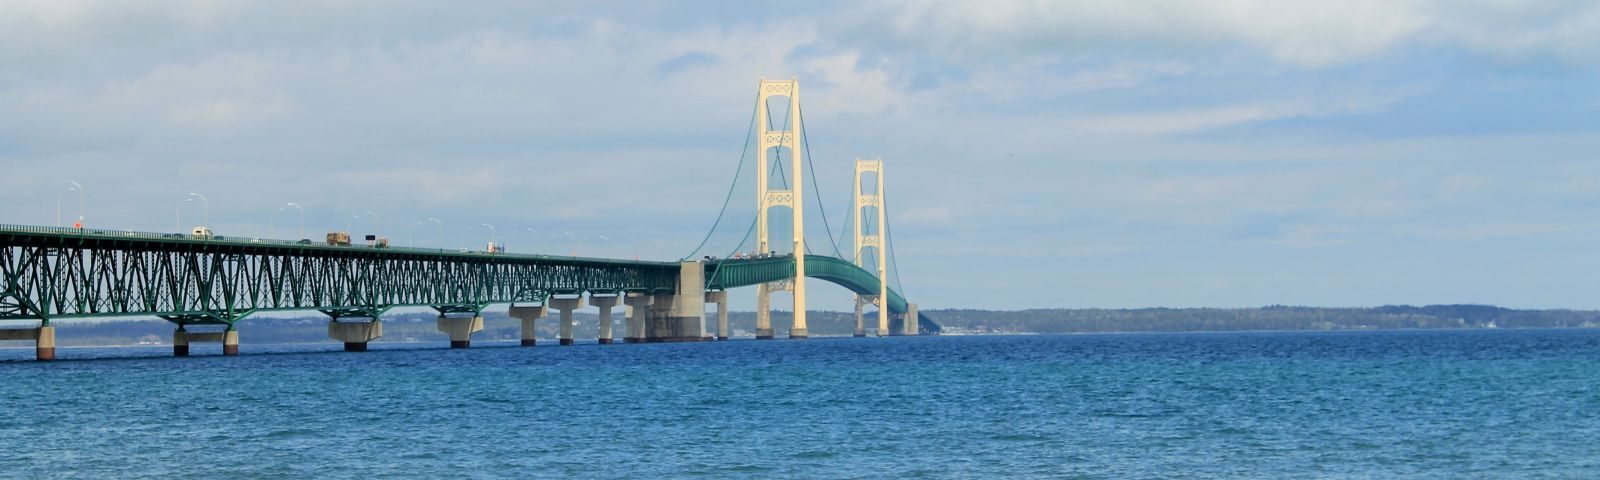 Photo taken from the south side of the Straits of Mackinac, facing north with a view of the Mackinac Bridge.